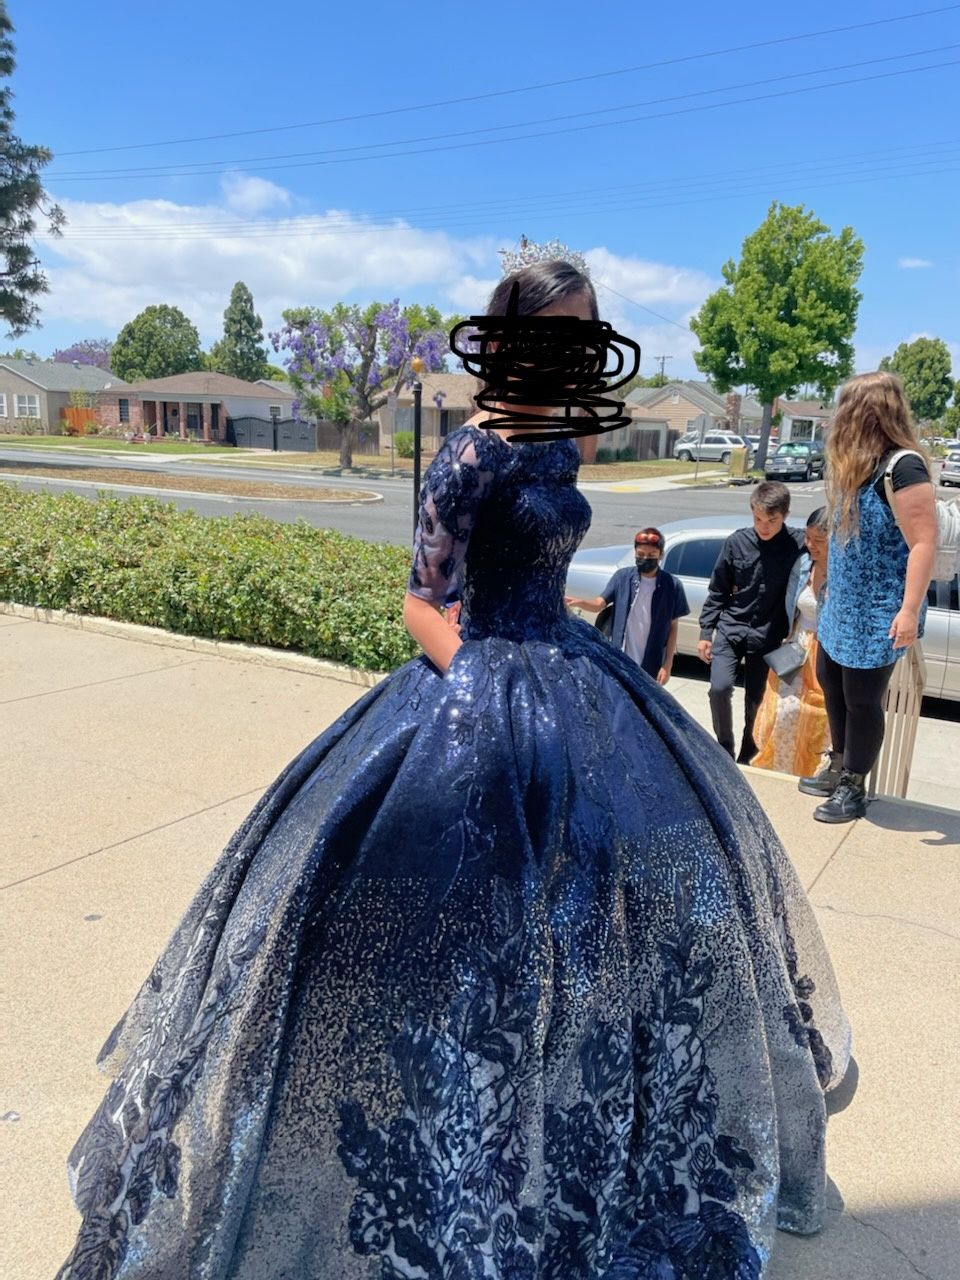 Tiara Gowns - ✨Royal Blue Floral Laced Crinoline Ball Gown (S-Med) FOR  SALE: ₱3400 + SF Best fit: 24-29 waistline; 32-36 bust Model height: 5'2 no  heels Weight: 3kgs Code: 610 *Model